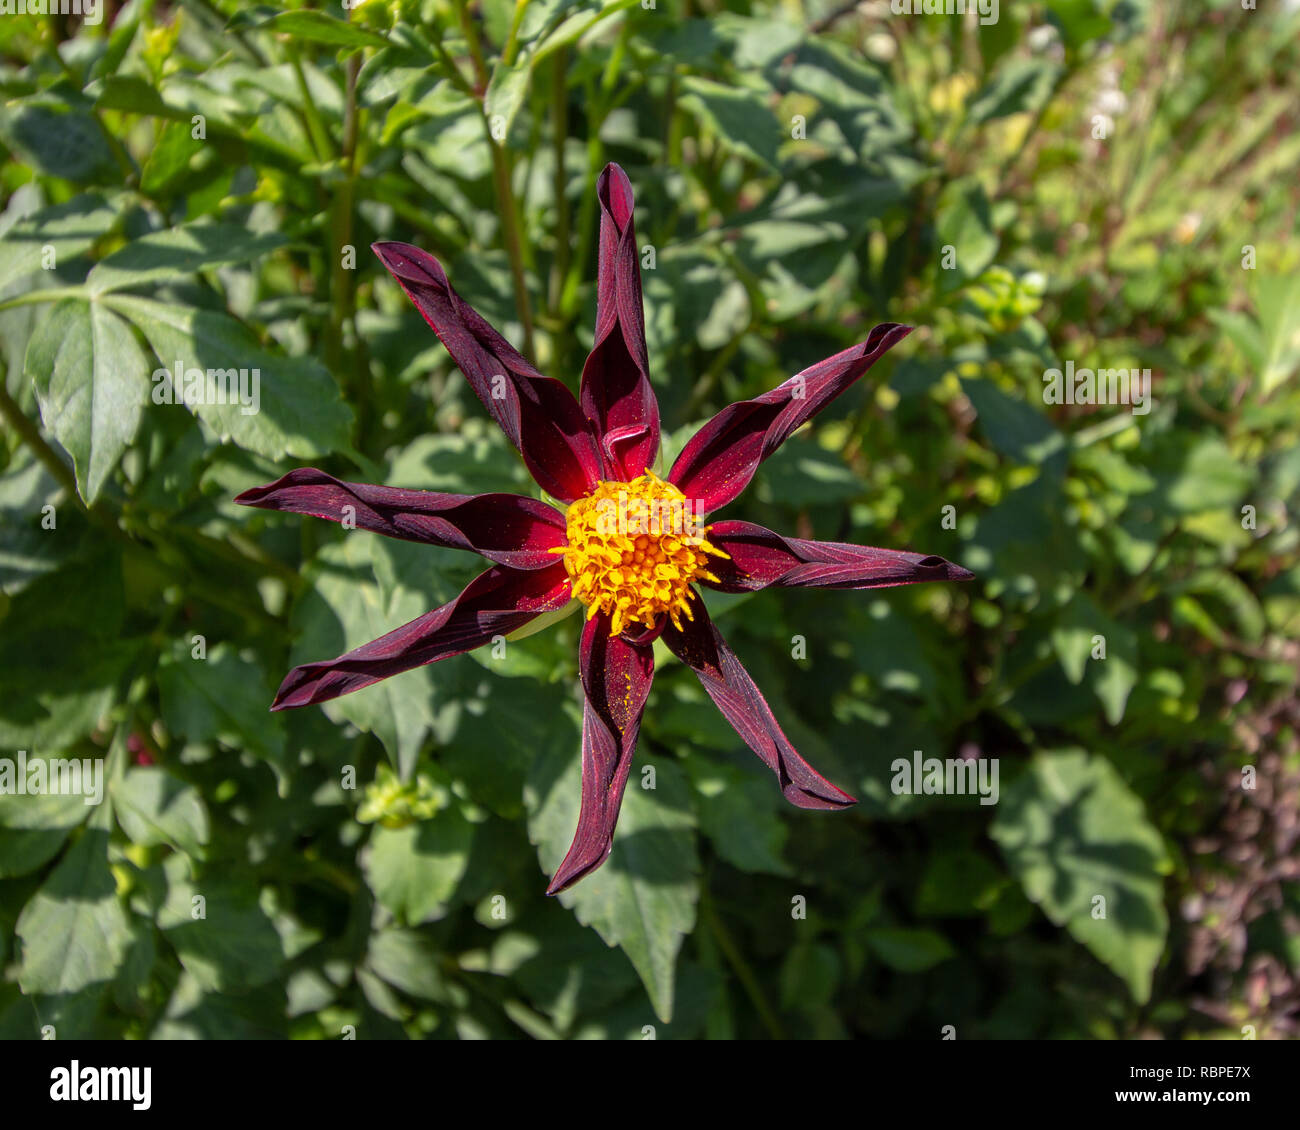 A star shaped flower with dark red and purple petals and yellow center Stock Photo